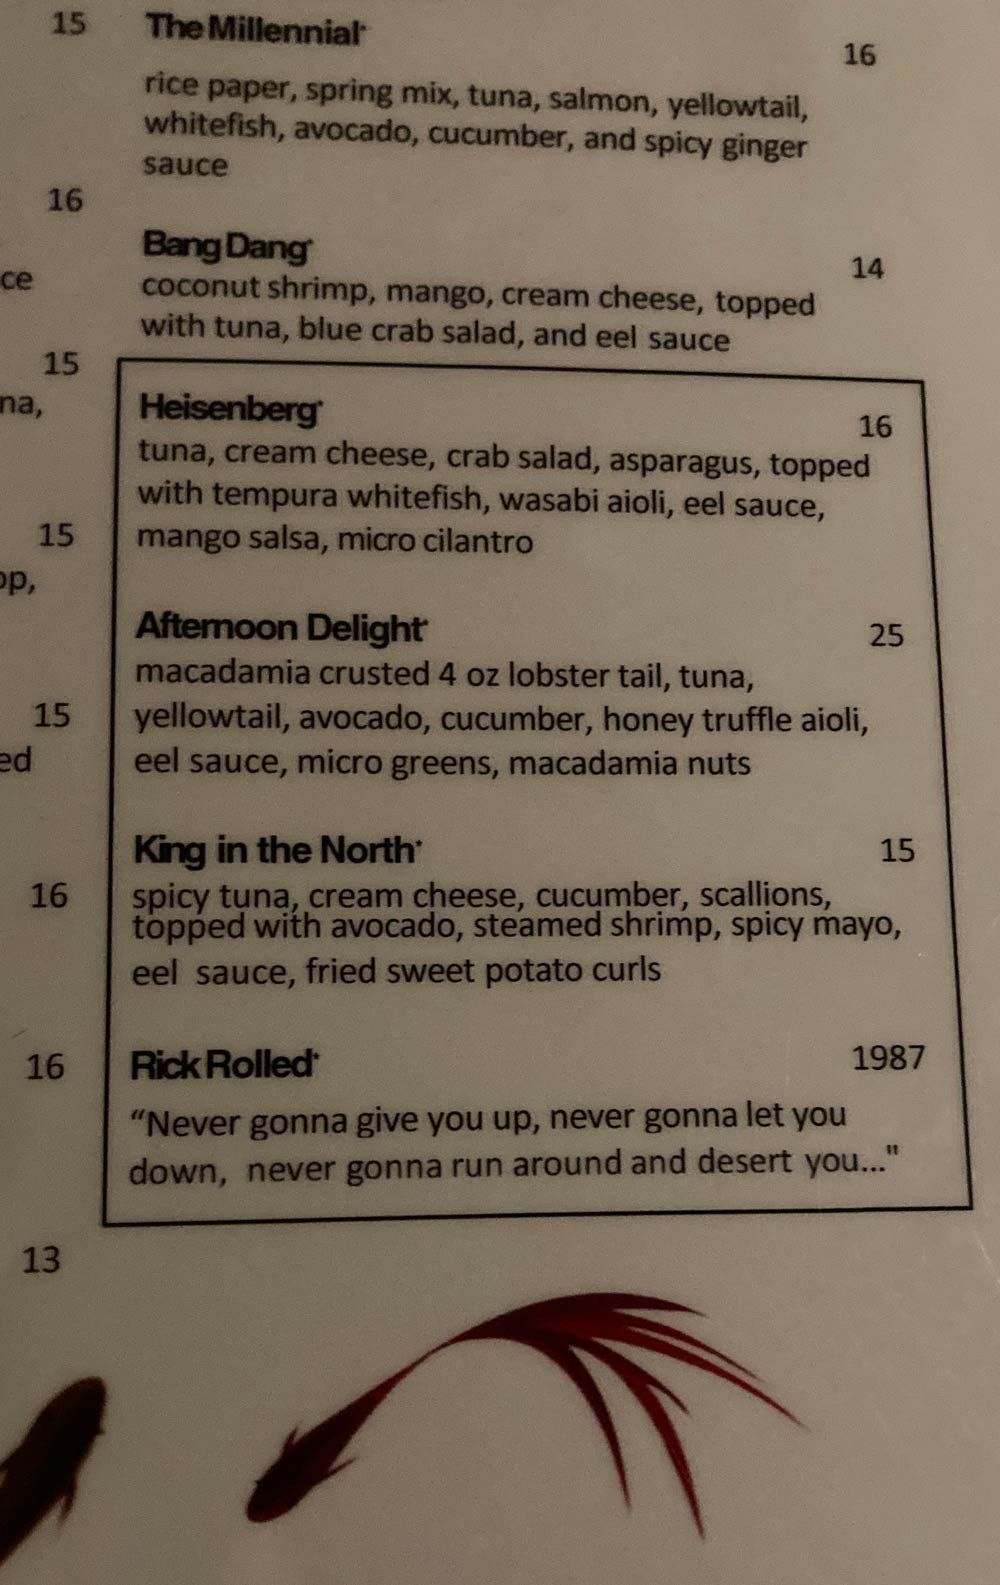 This was on the menu at the sushi restaurant I went to